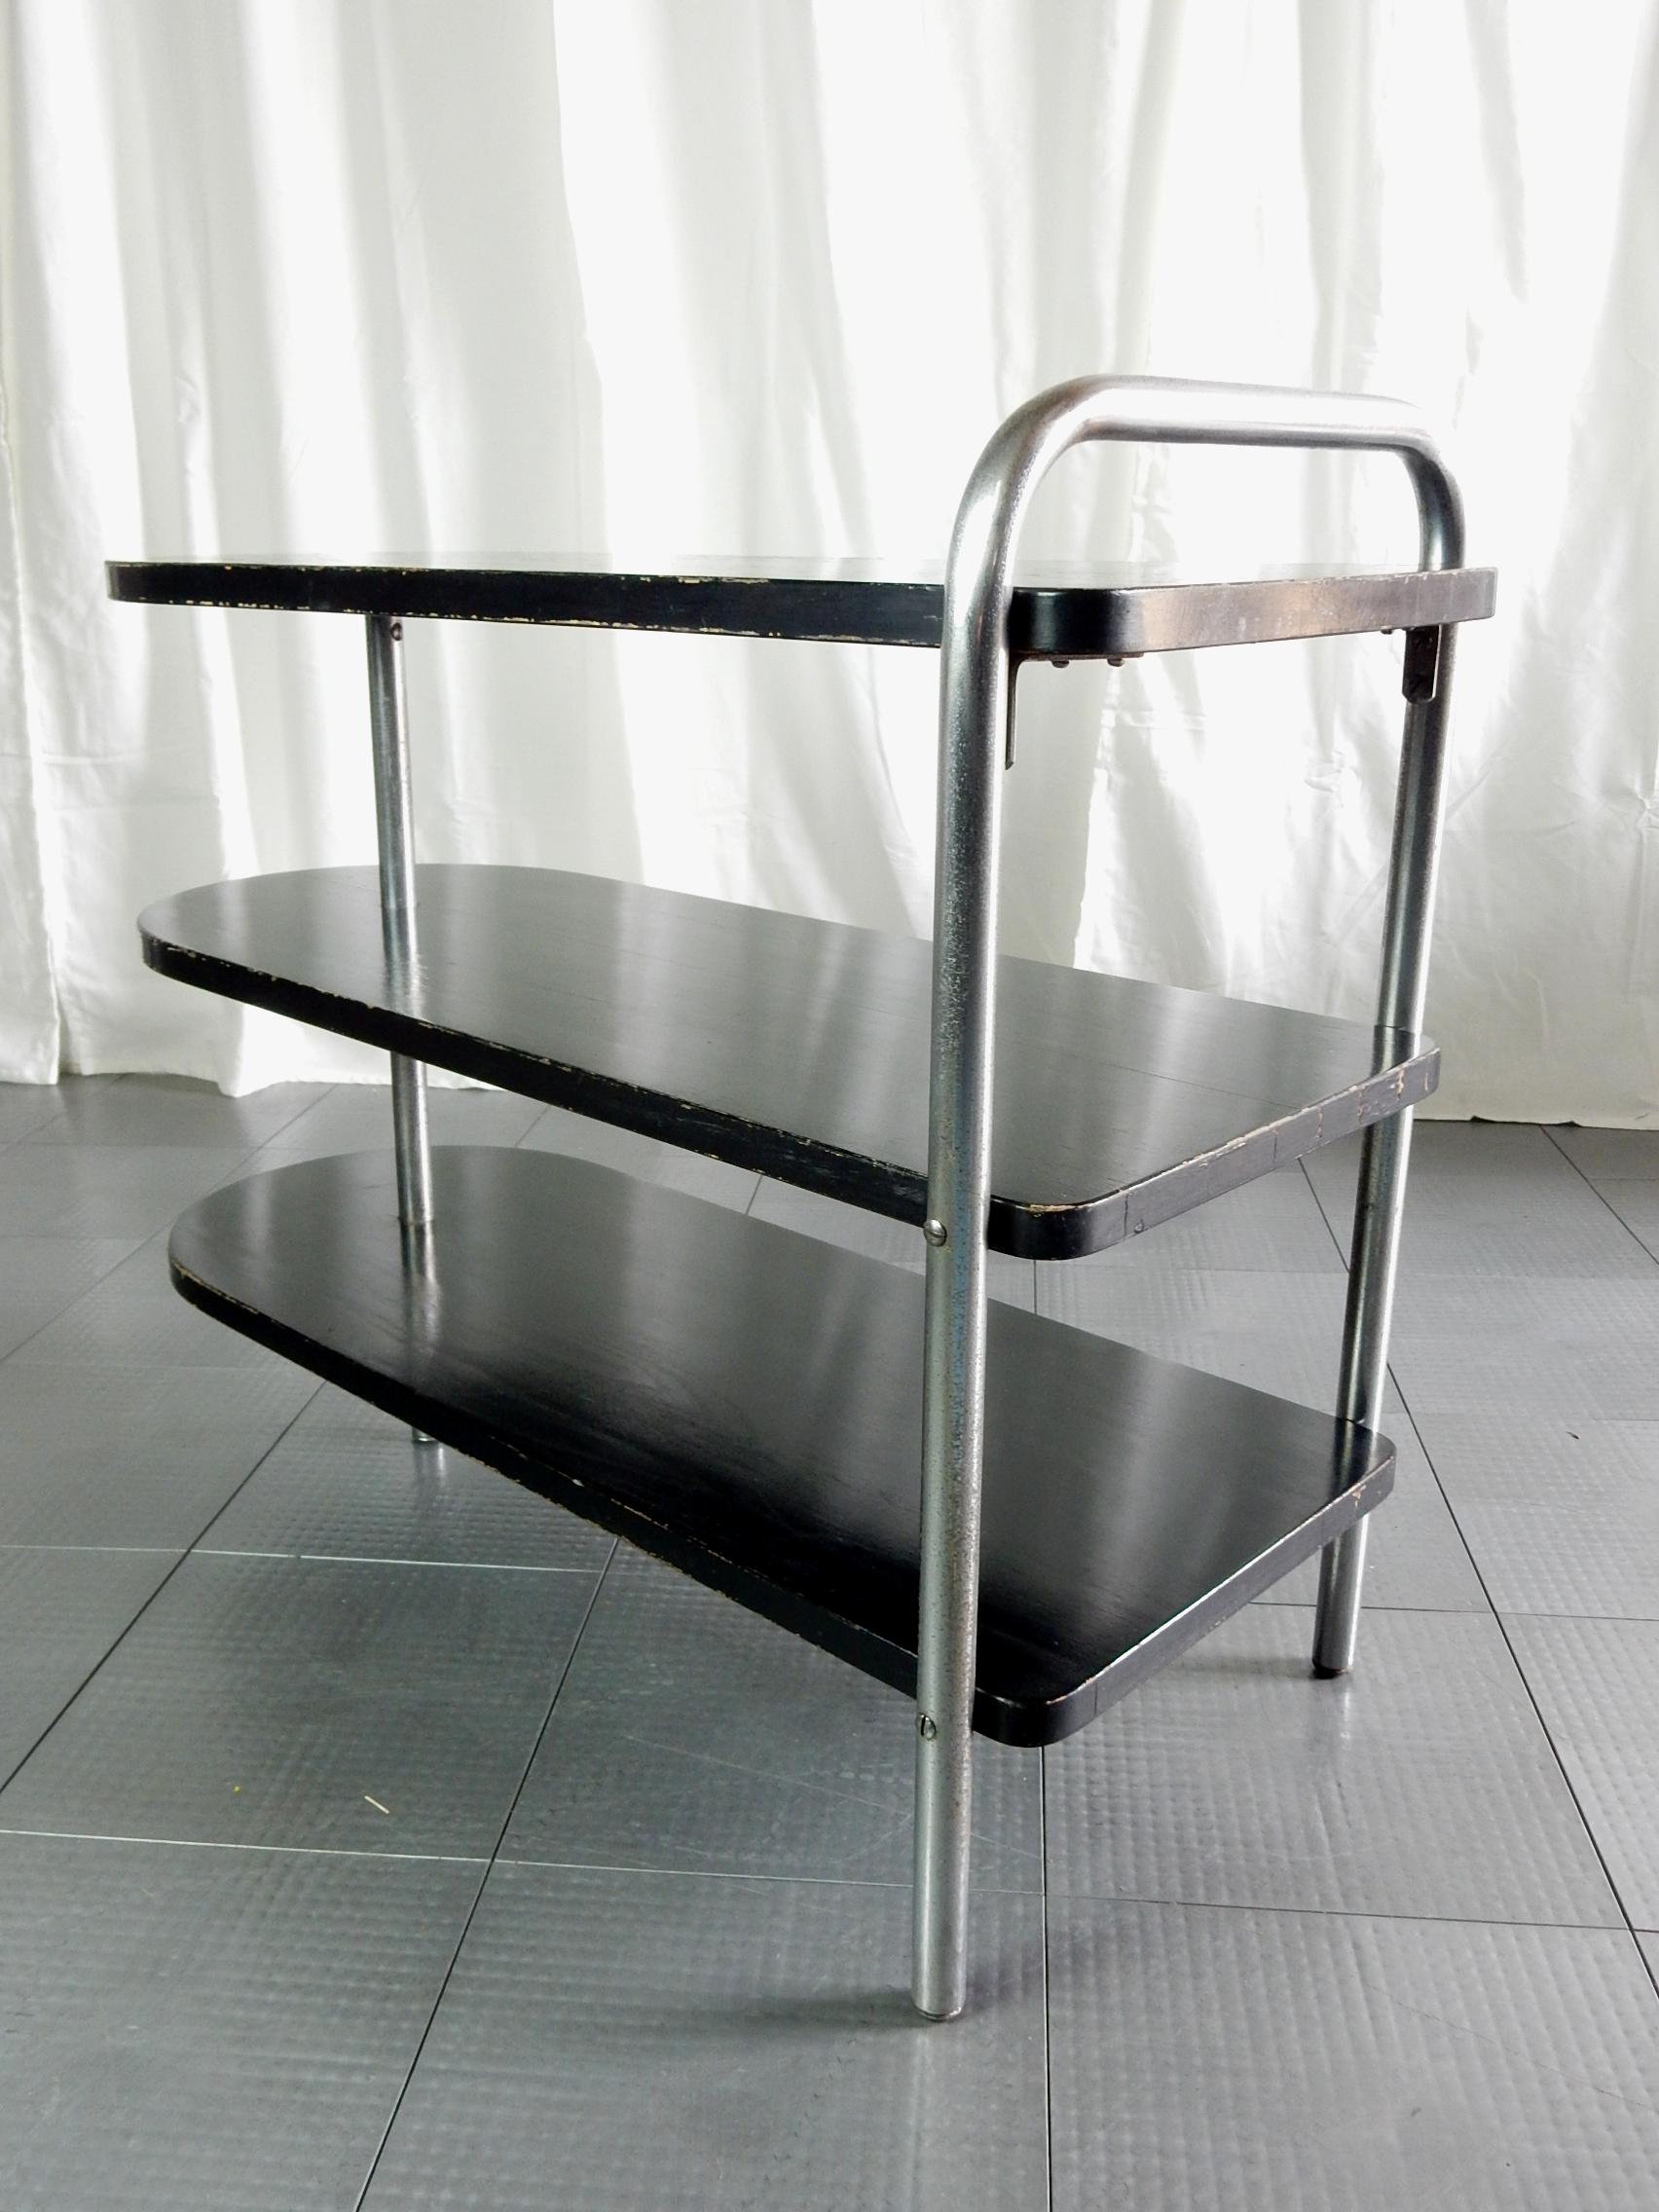 Iron board shape 3-tier end table designed by Wolfgang Hoffmann.
Ebonized wood with nickel plated bent steel tube legs.
Howell label on bottom. Not restored, completely original without repairs or damage.